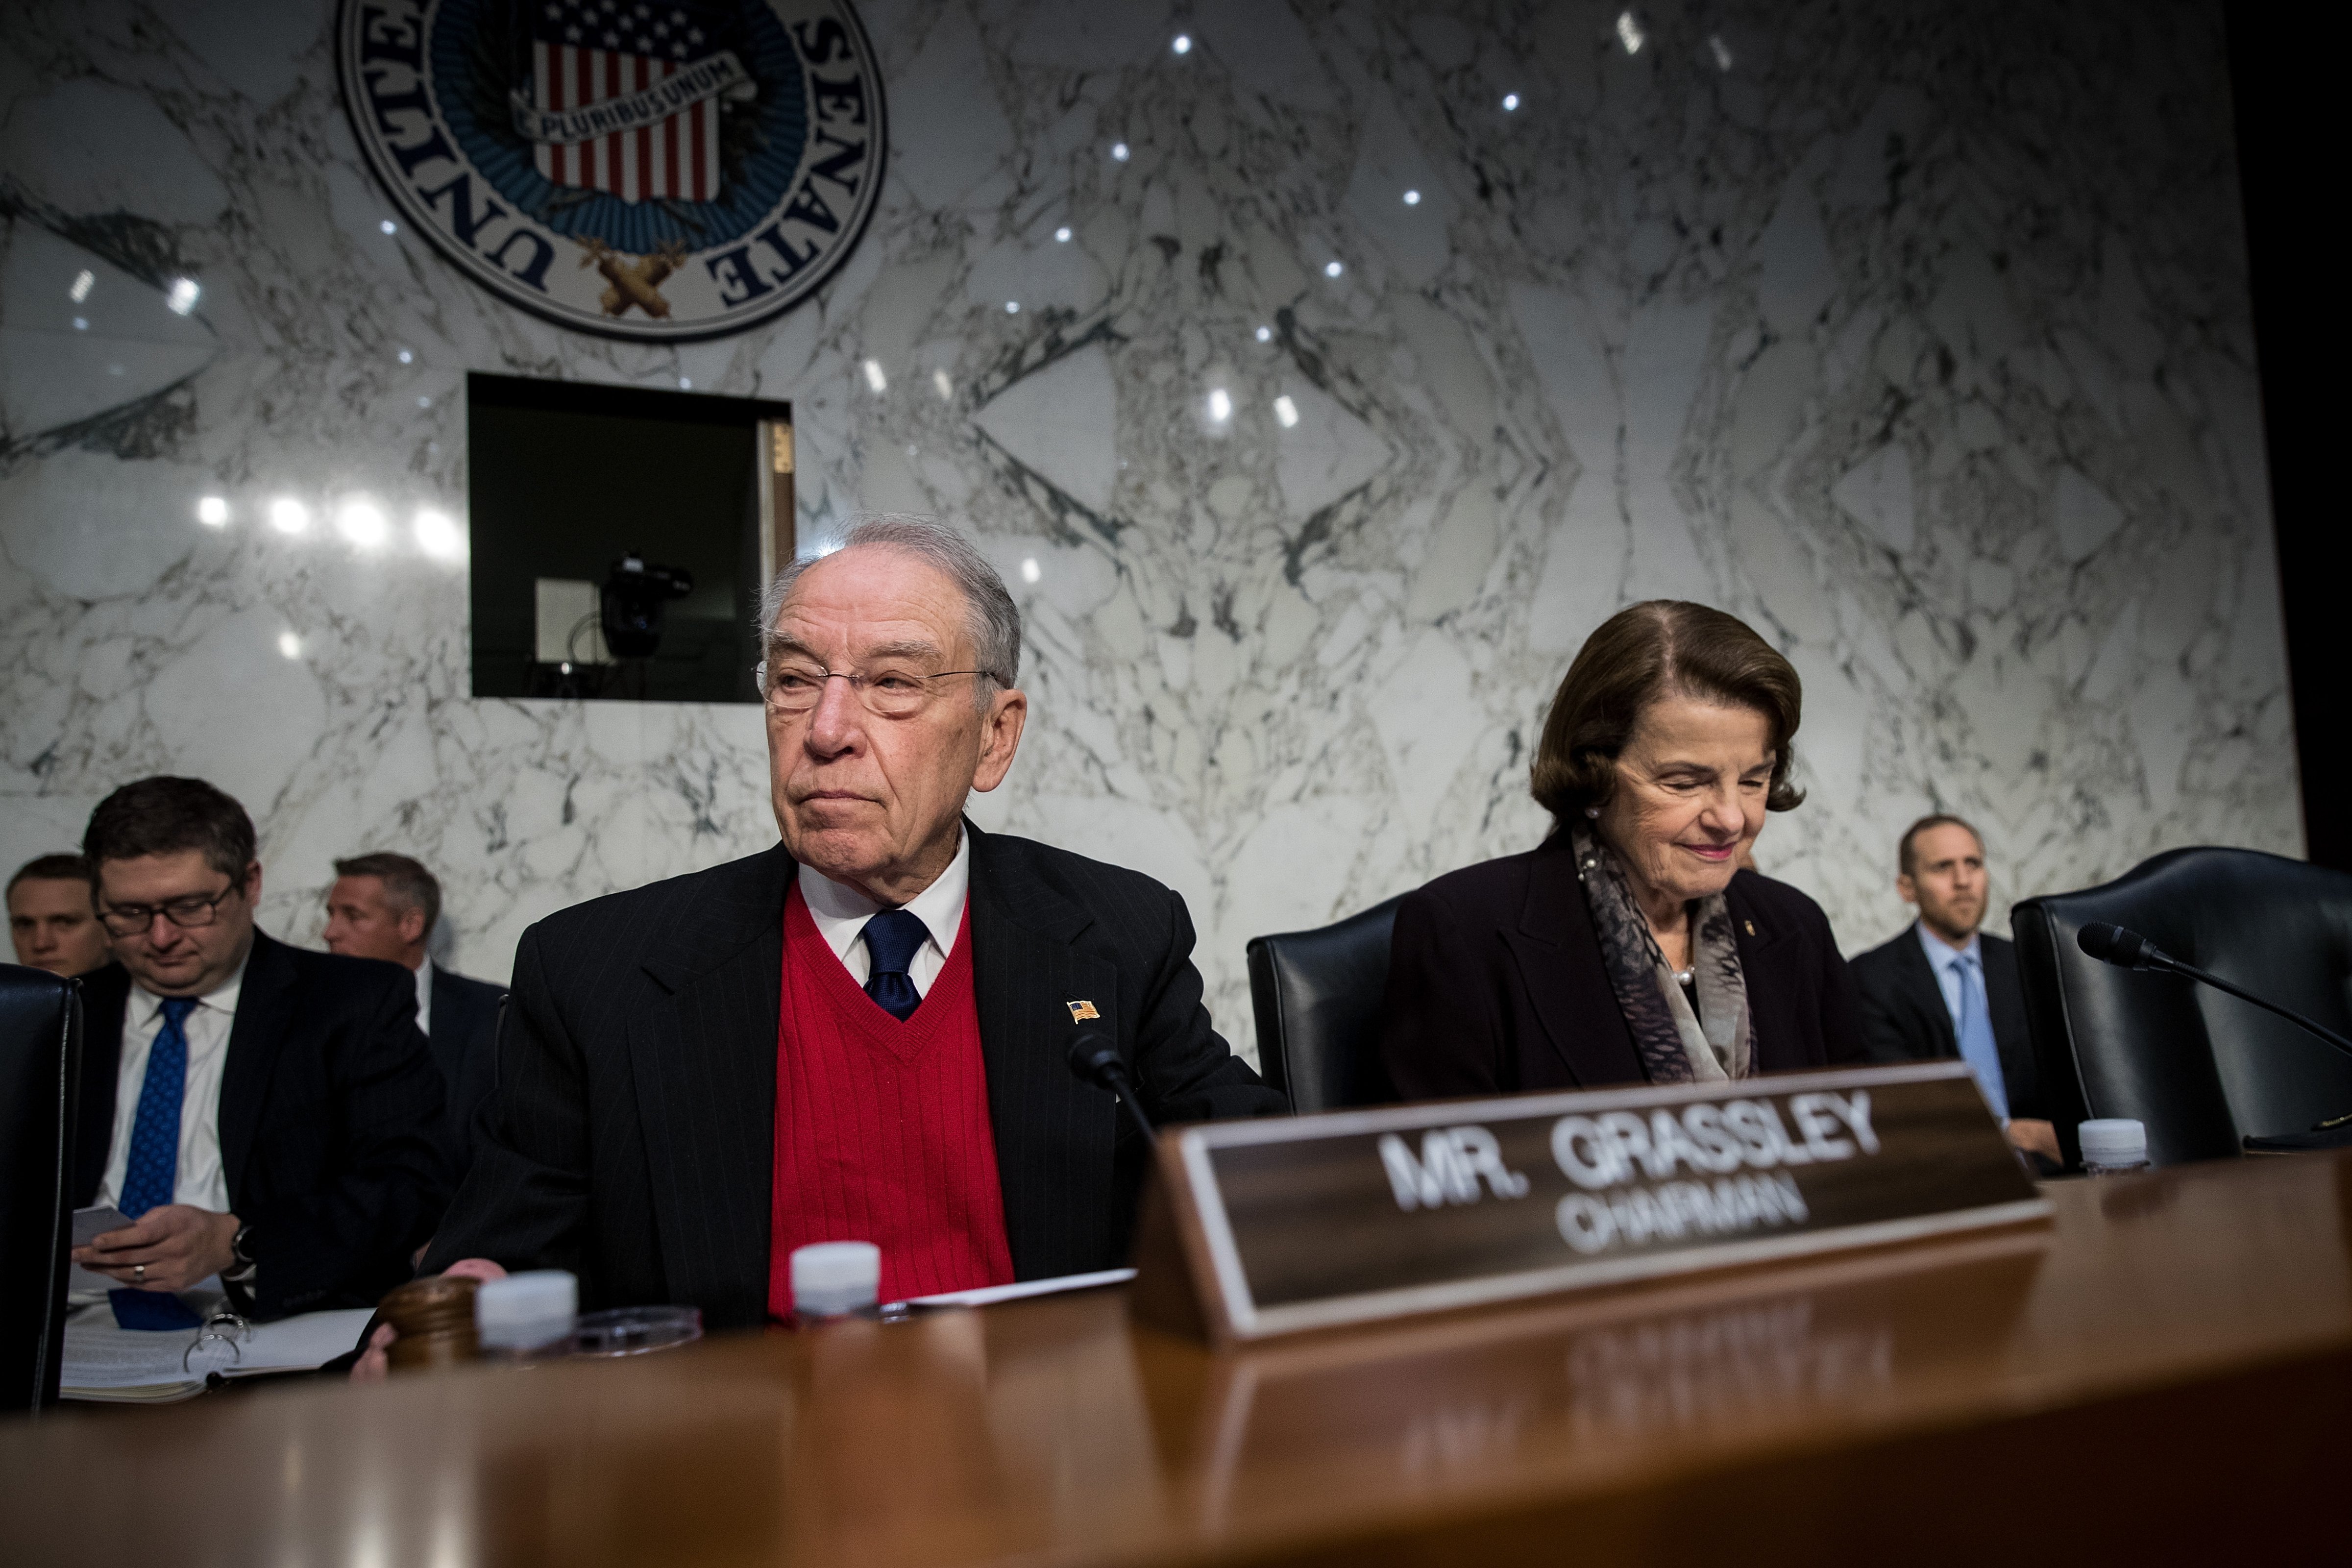 Committee chairman Sen. Chuck Grassley (R-IA) and ranking member Sen. Dianne Feinstein (D-CA) arrive for a Senate Judiciary Committee hearing on Capitol Hill, December 6, 2017 in Washington, DC. (Drew Angerer—Getty Images)